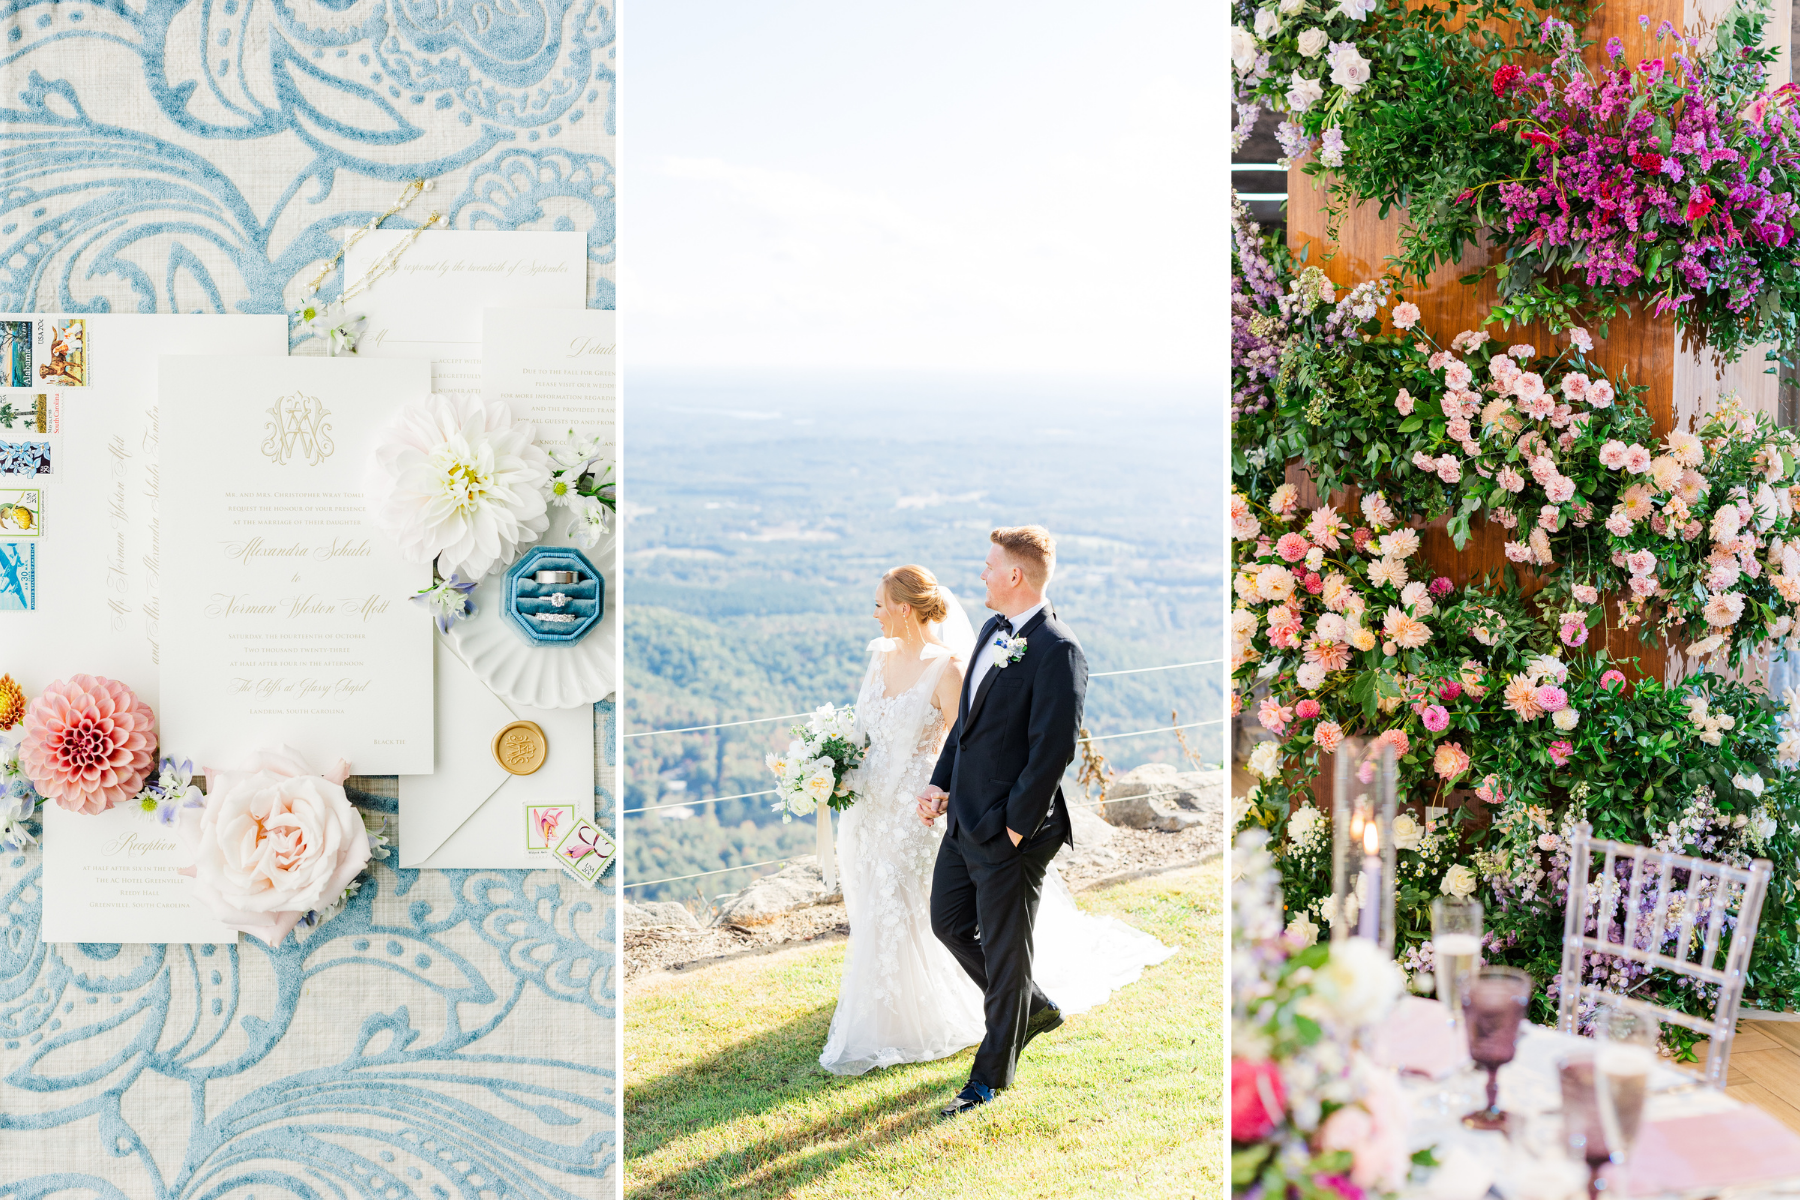 An AC Hotel Reception & Cliffs at Glassy Wedding Ceremony in Greenville SC